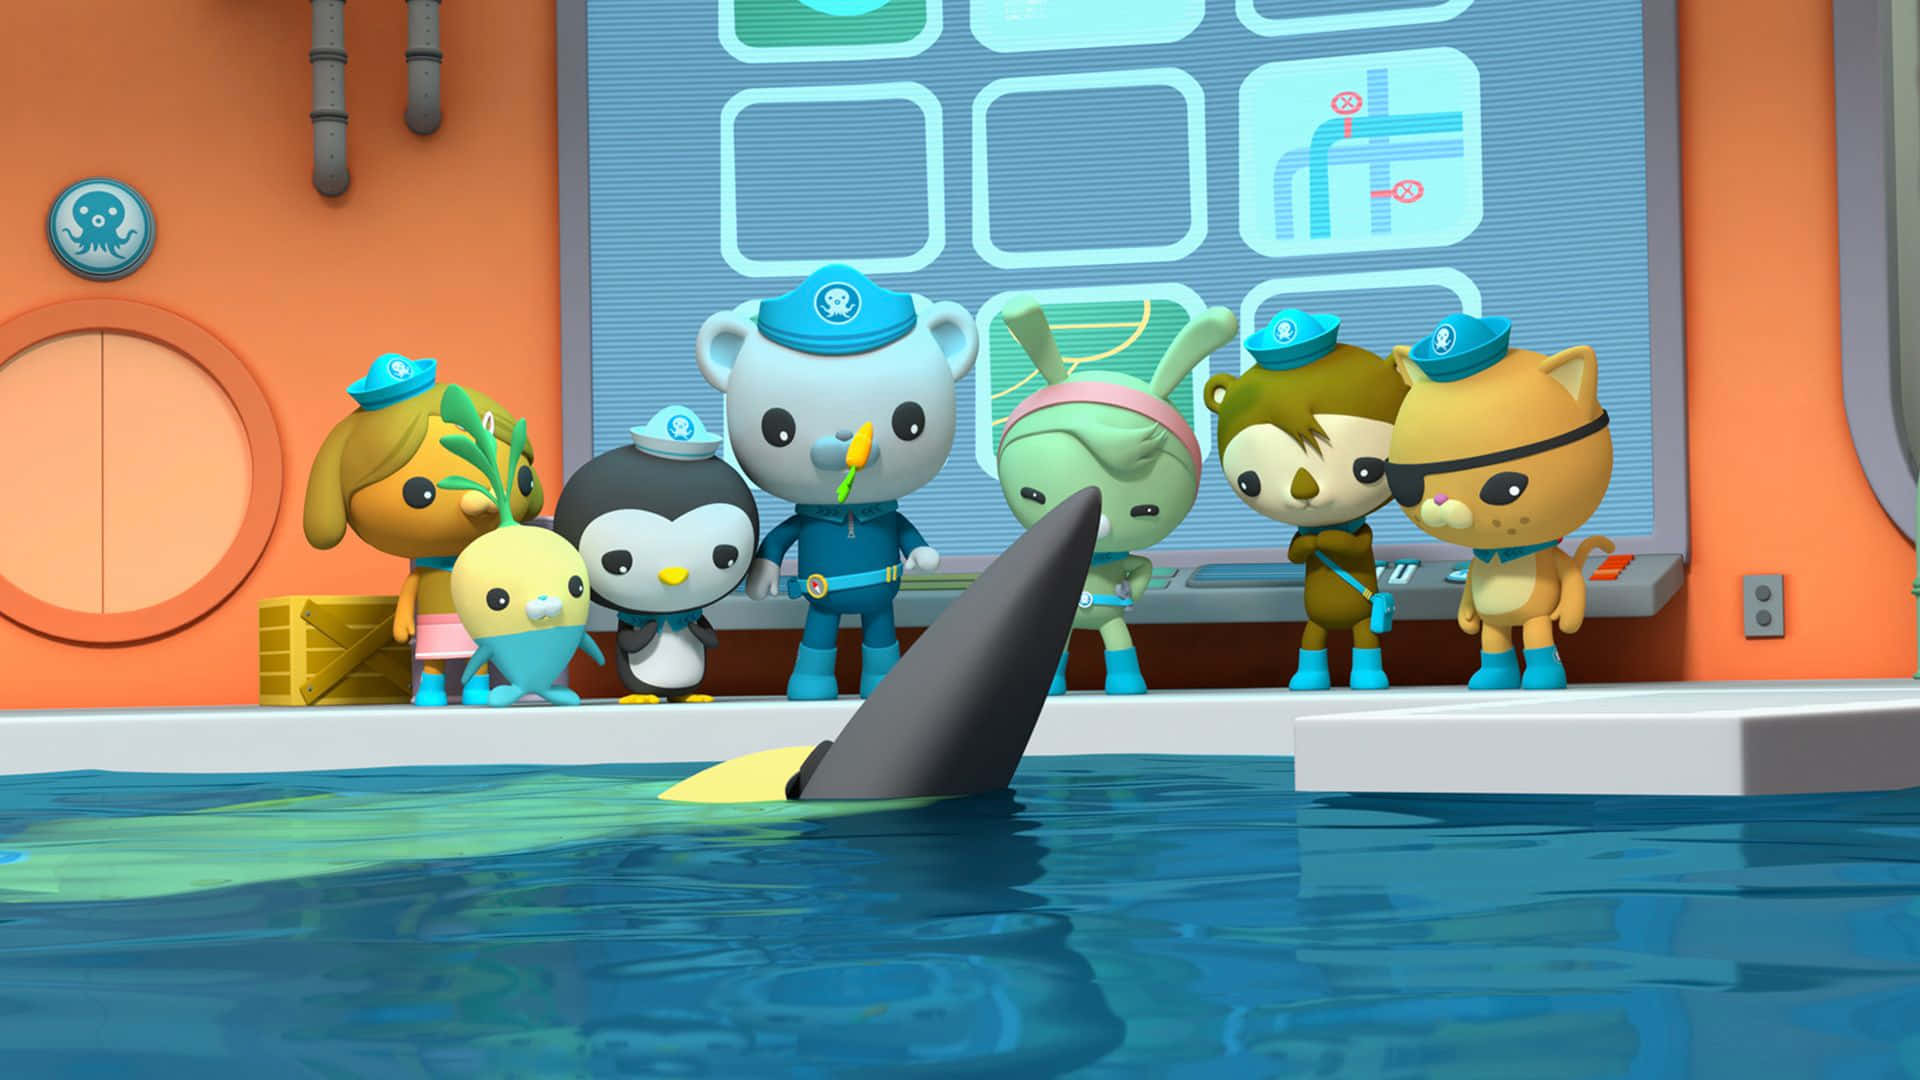 Explore the amazing depths of the ocean with the Octonauts! Wallpaper